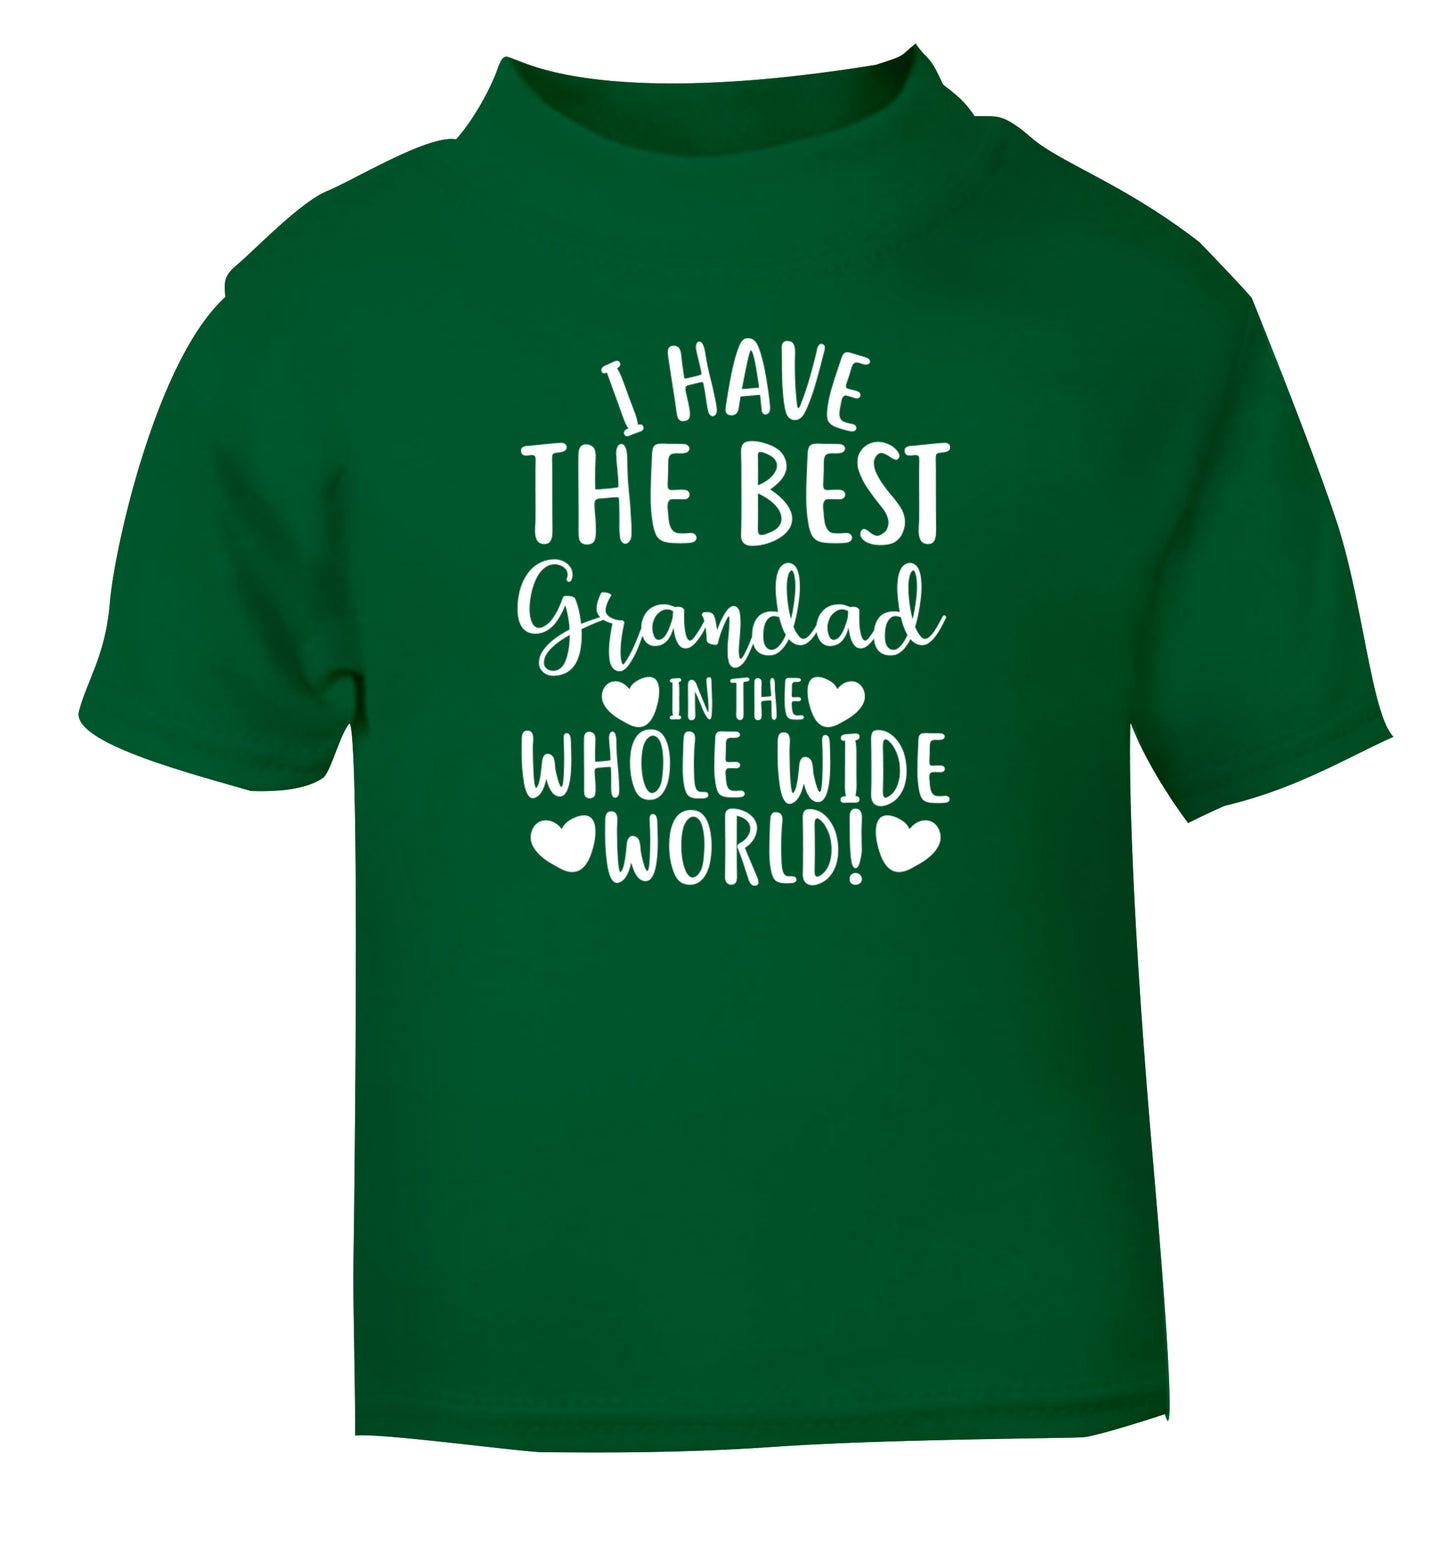 I have the best grandad in the whole wide world! green Baby Toddler Tshirt 2 Years